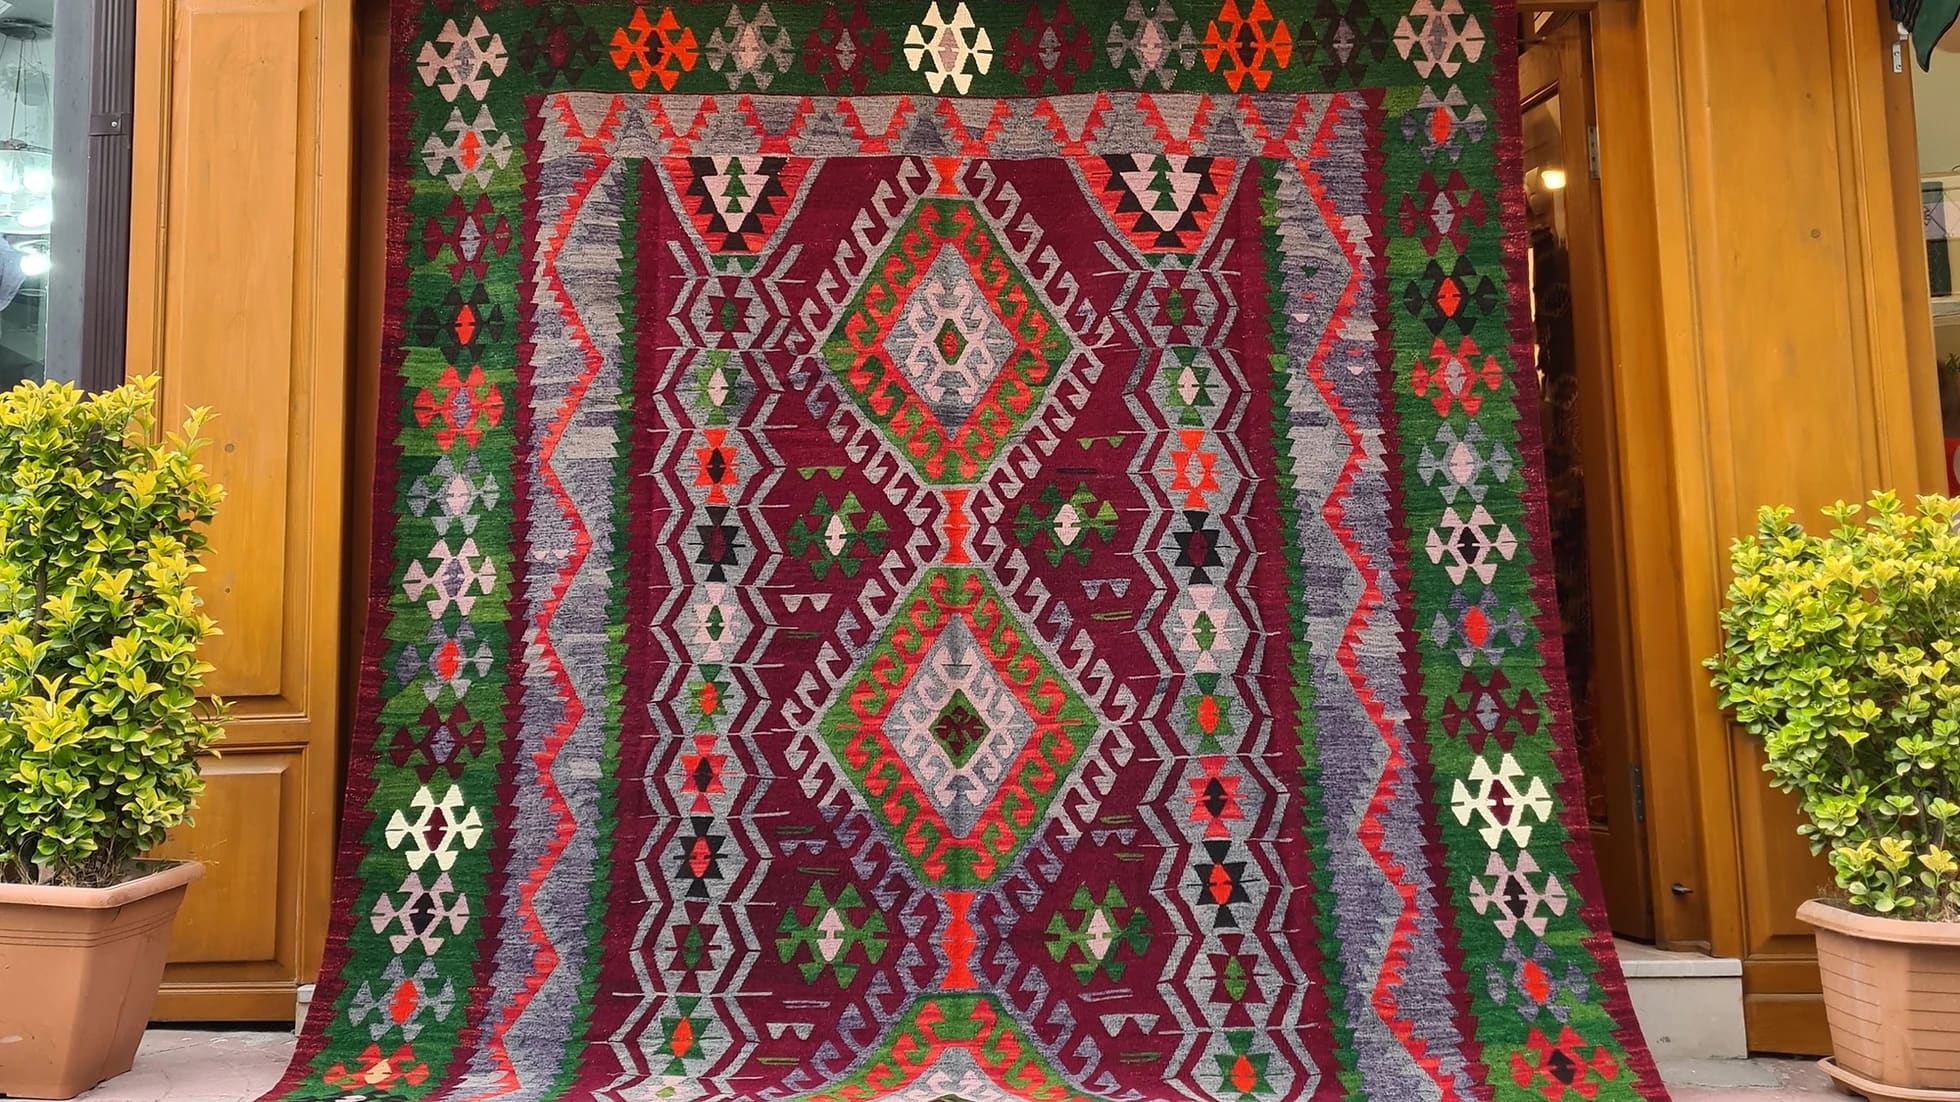 Vintage Handmade Turkish Rug with geometric patterns in red, grey, green in tribal style